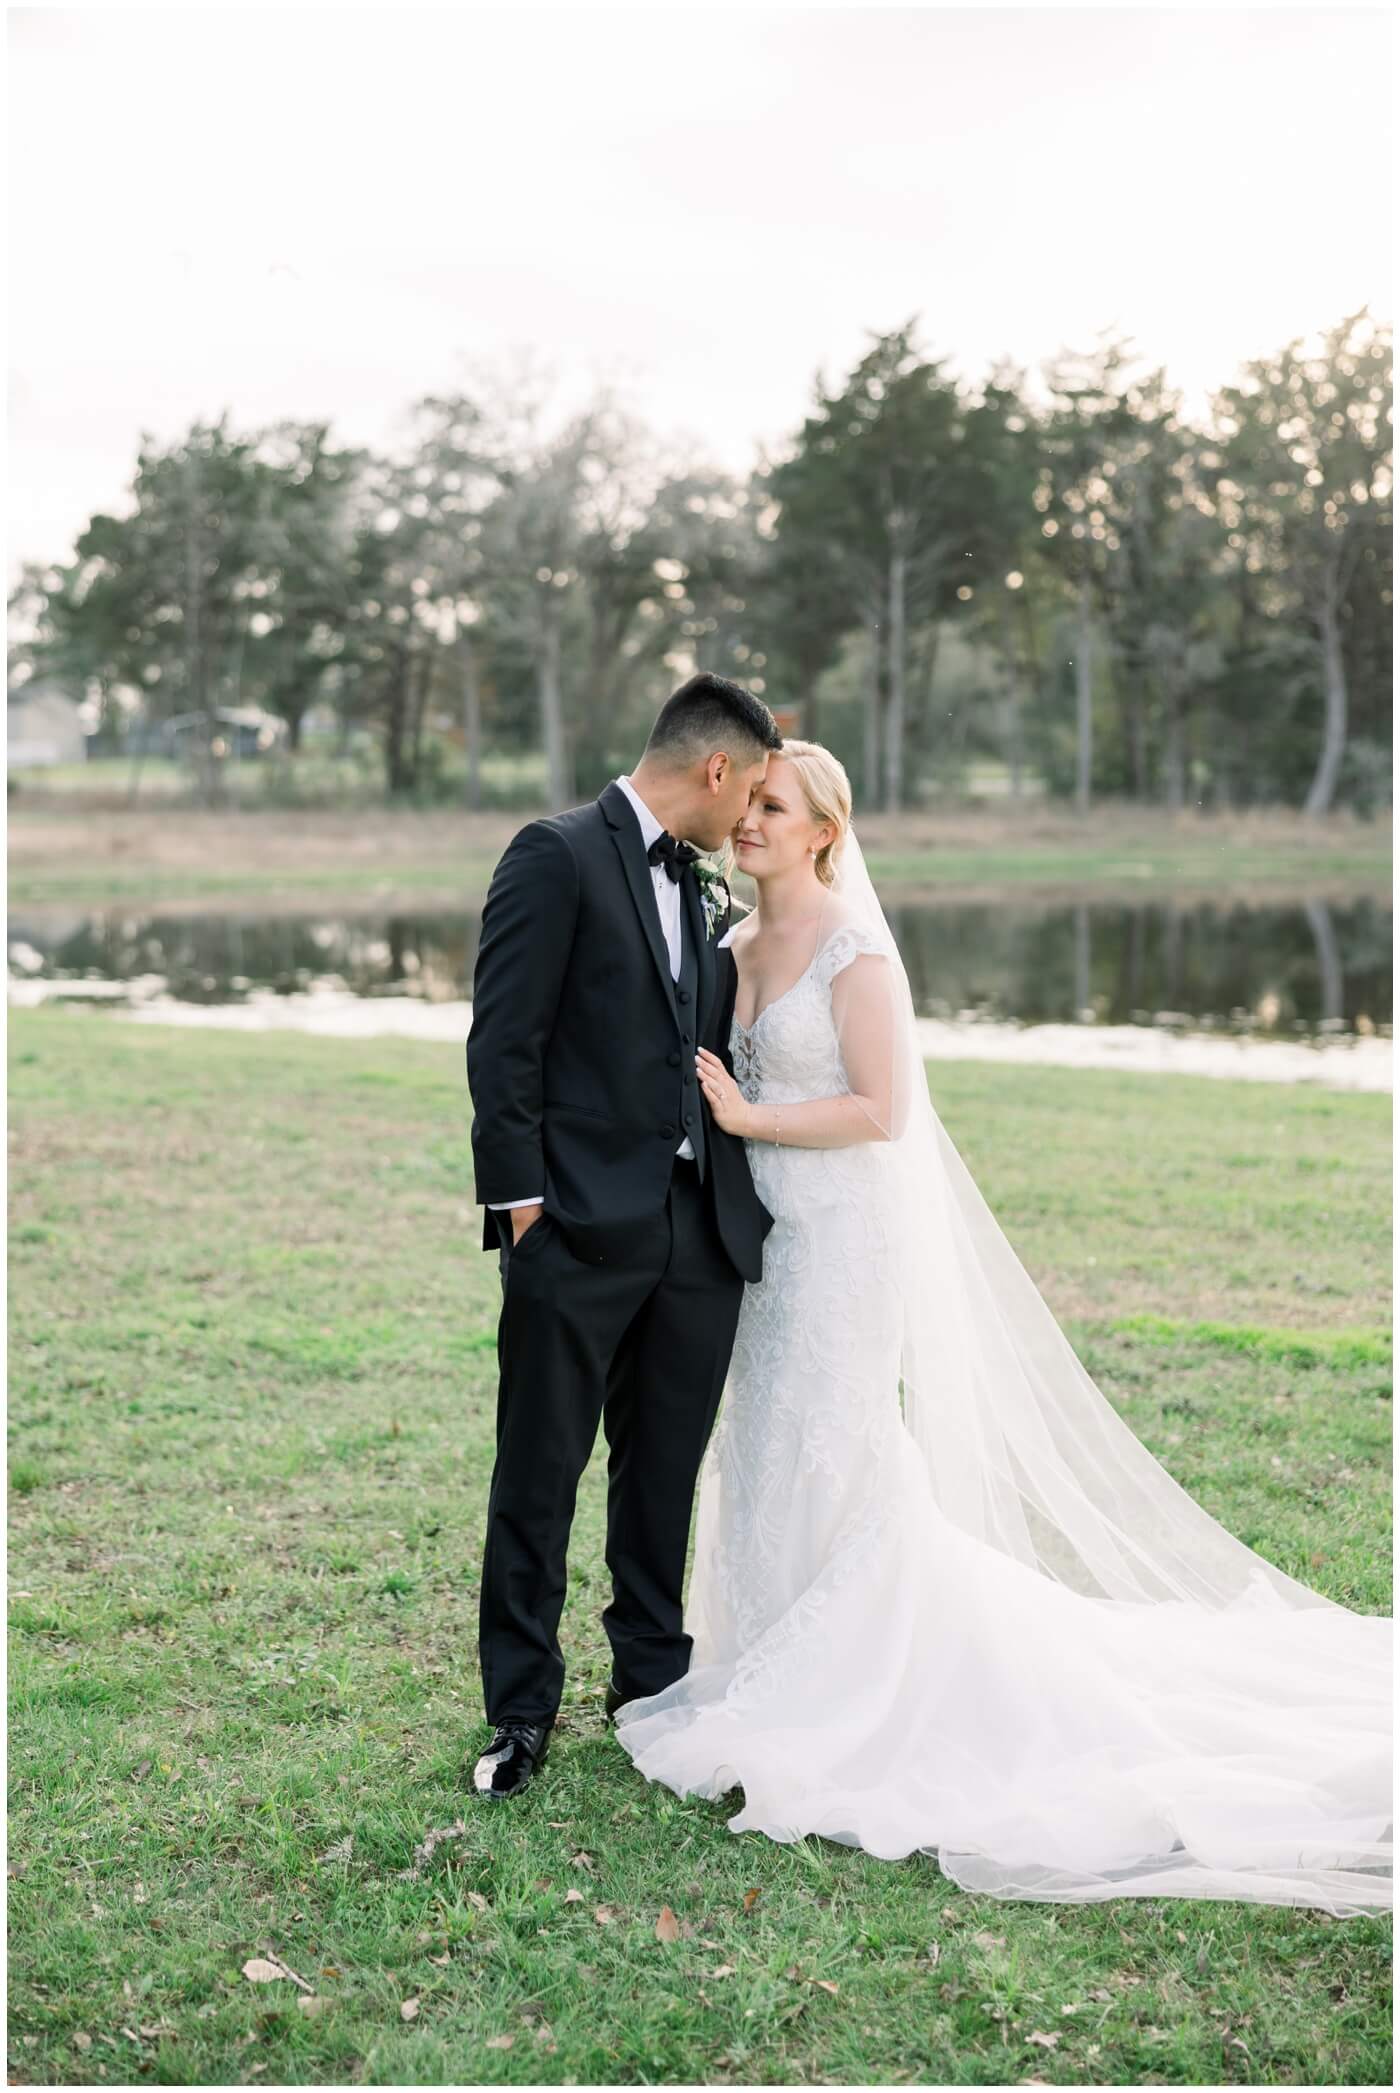 Bride and groom portraits at the vine